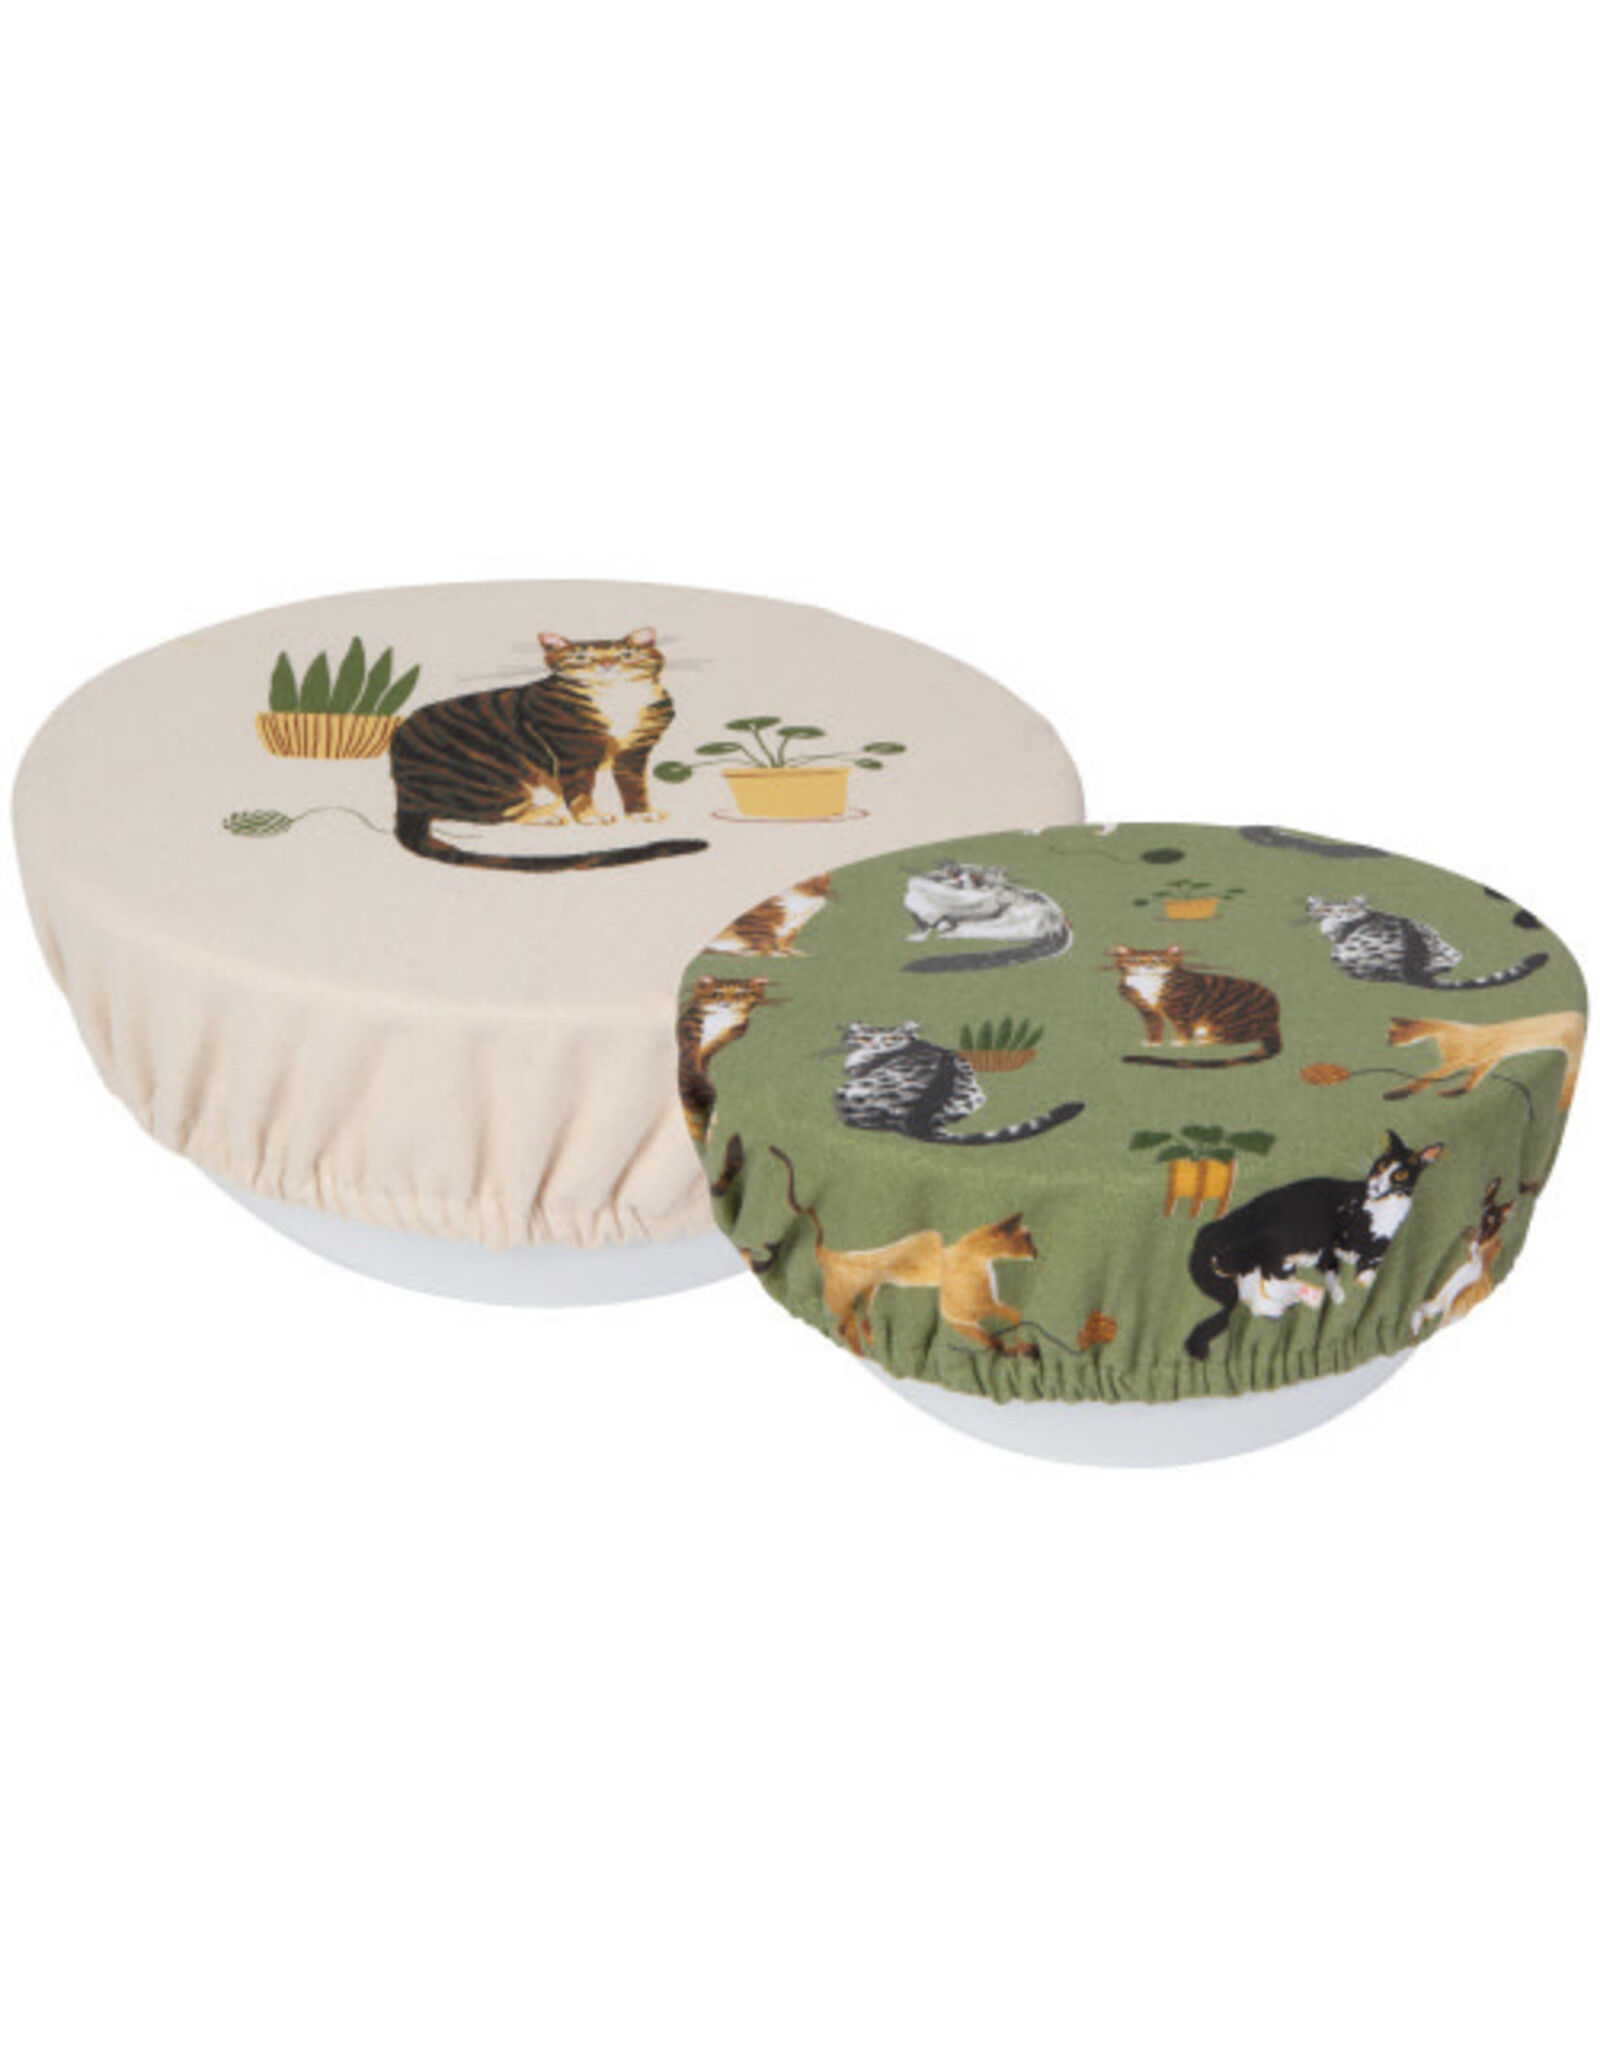 Bowl Cover Set of 2 - Cat Collective